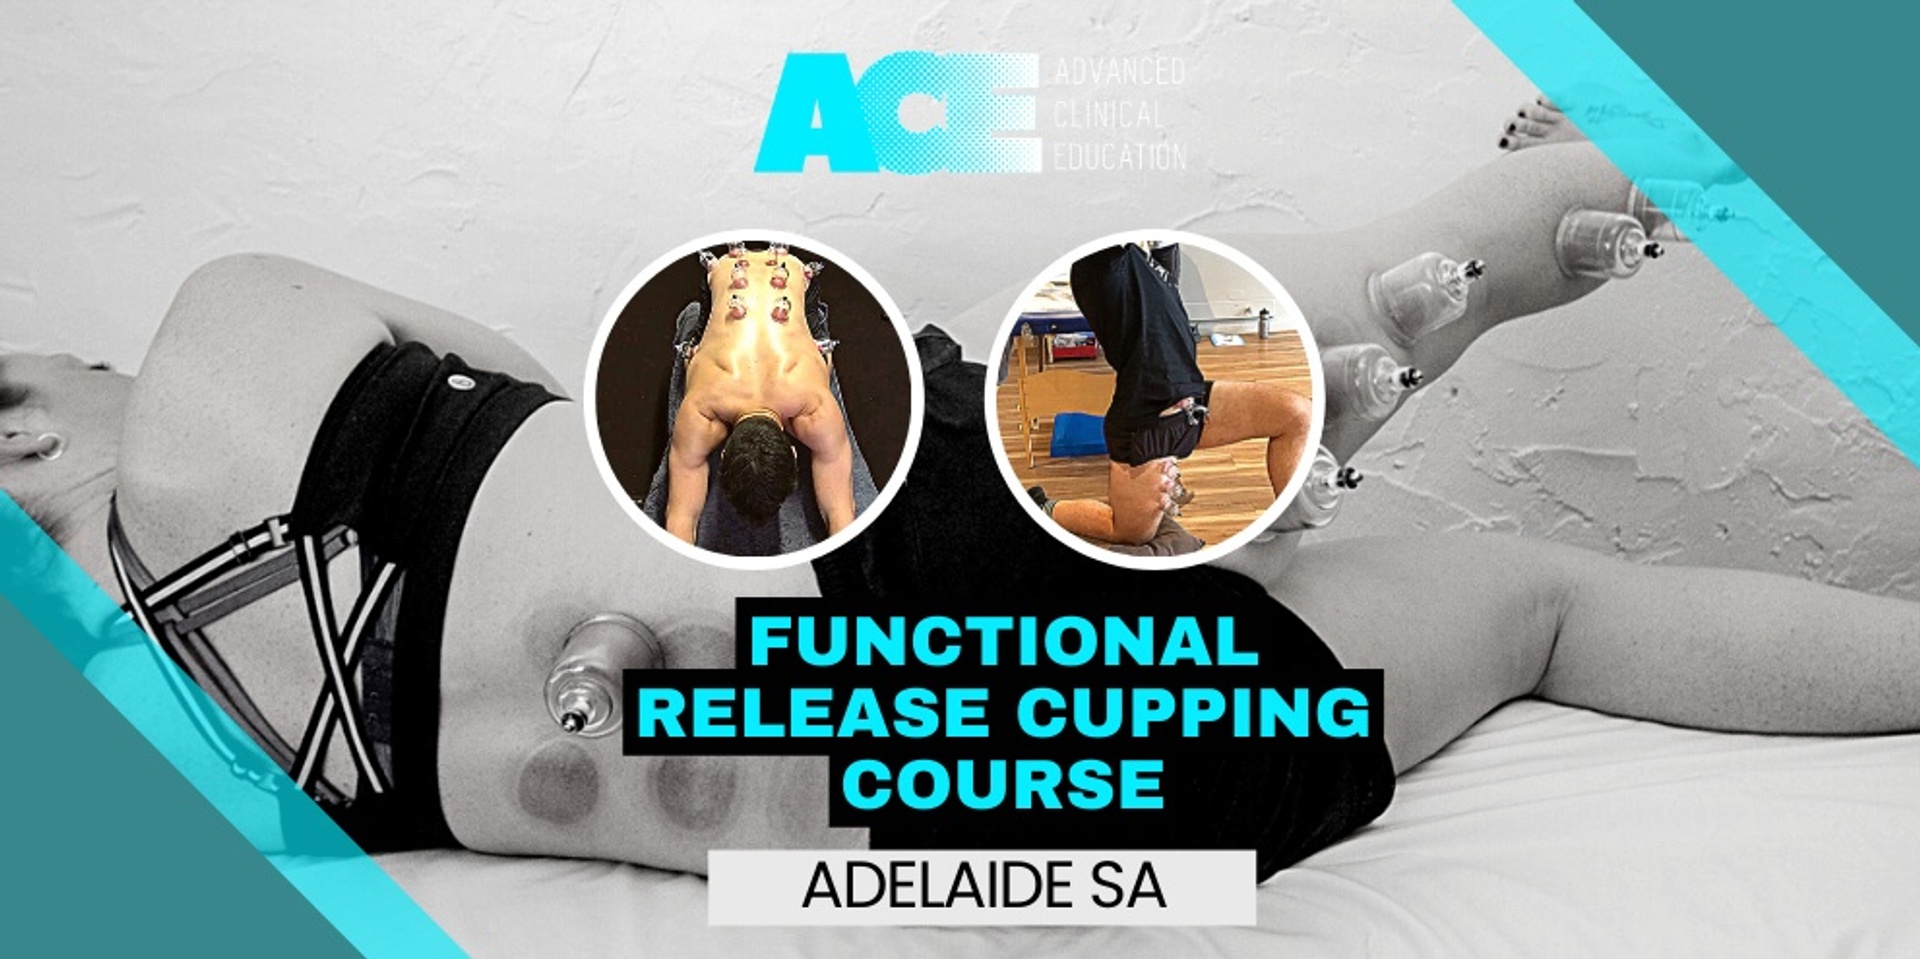 Functional Release Cupping Course (Adelaide SA)